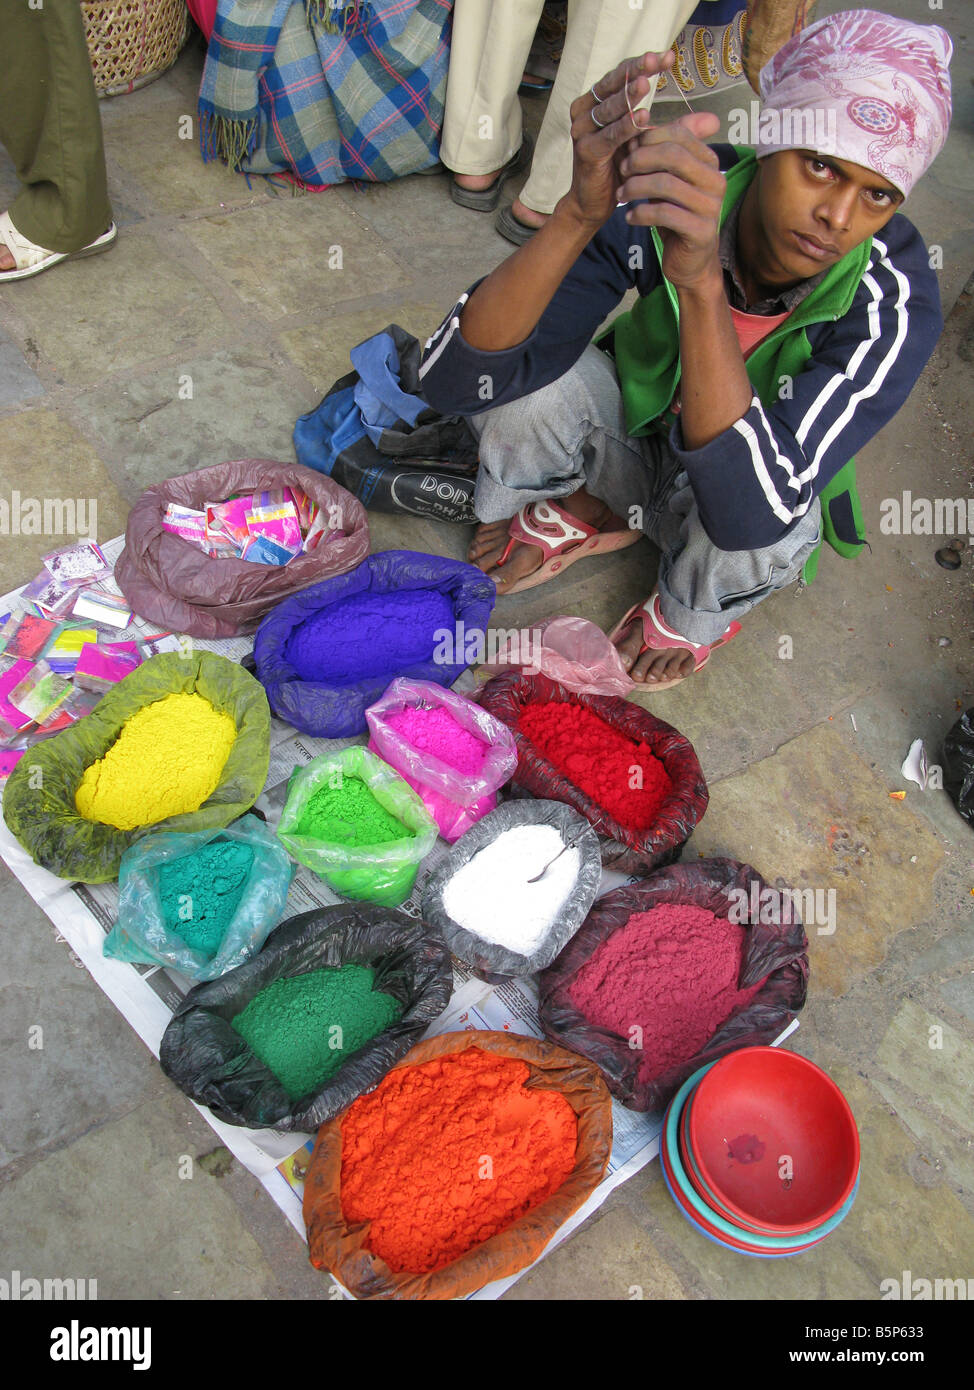 A man selling pigments during Tihar (Diwali), the Festival of Light, on a street in the Indra Chowk area of Kathmandu, Nepal, central Asia Stock Photo